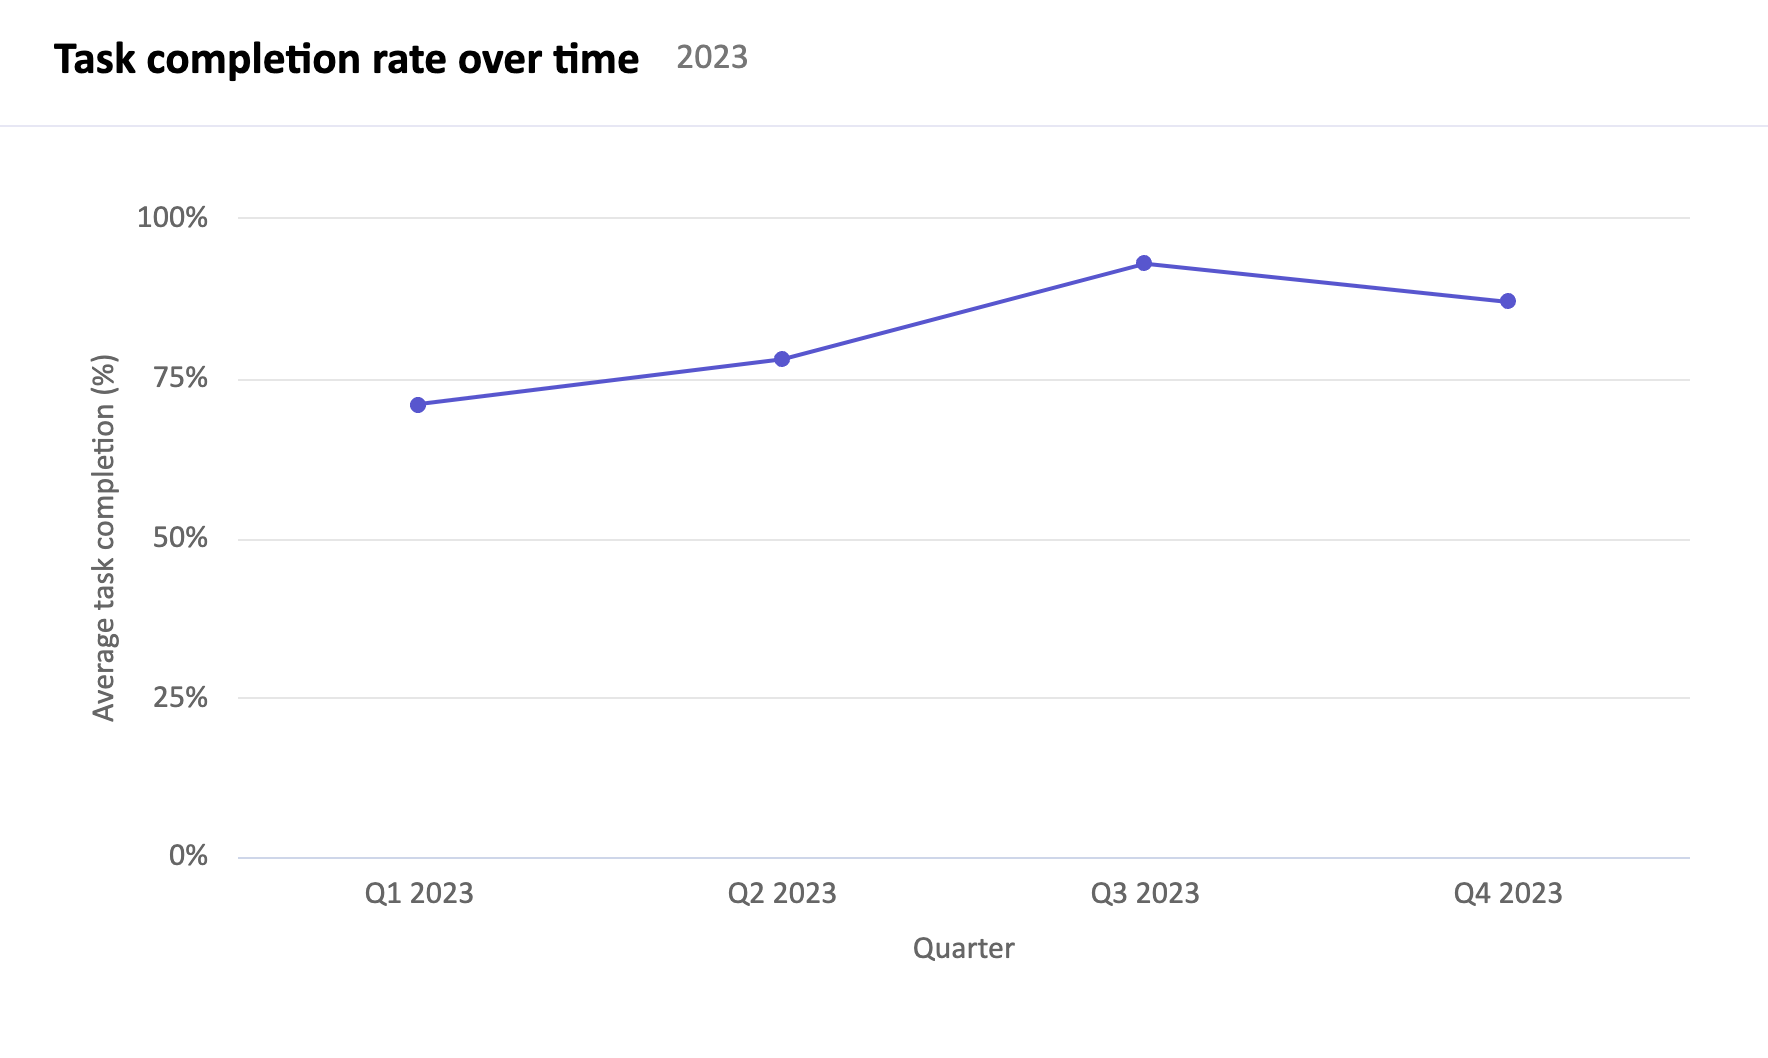 Line graph titled task completion rate over time. Shows the task completion rate by quarter for 2023.